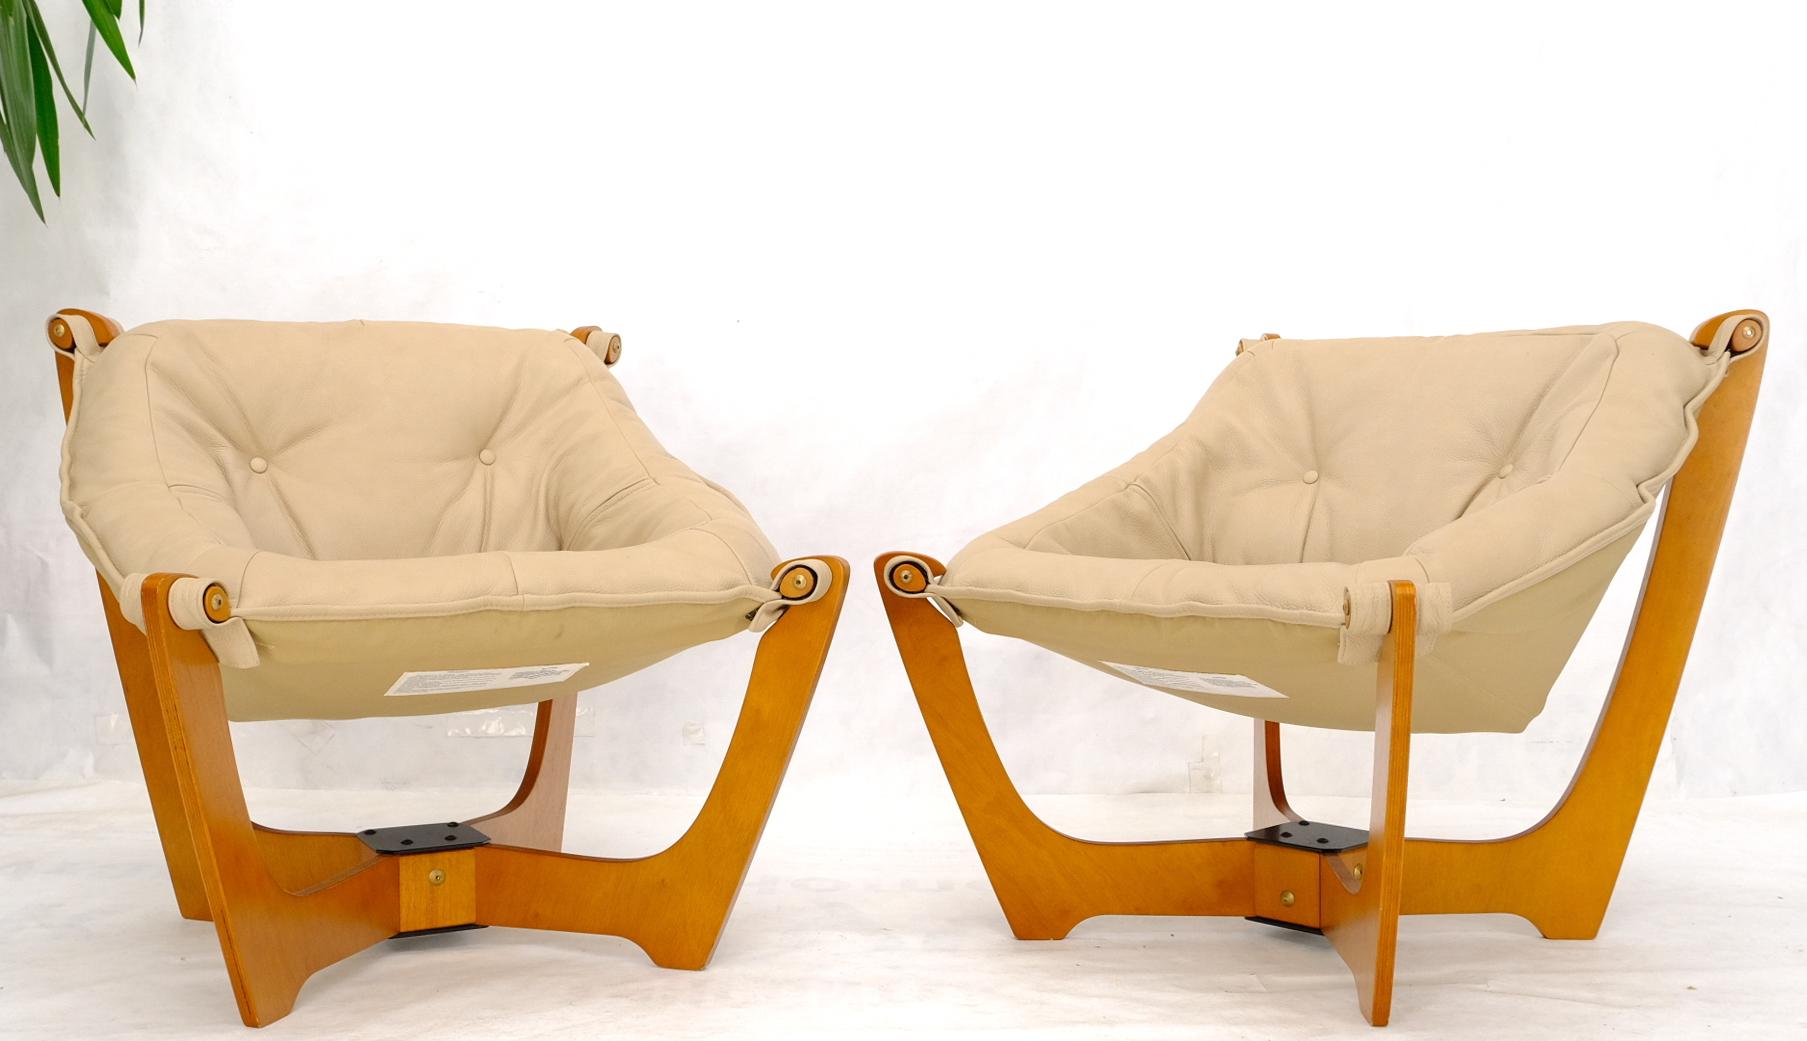 Pair of Mid Century Danish Modern Teak Frames Leather Sling Seat Lounge Chairs In Good Condition For Sale In Rockaway, NJ